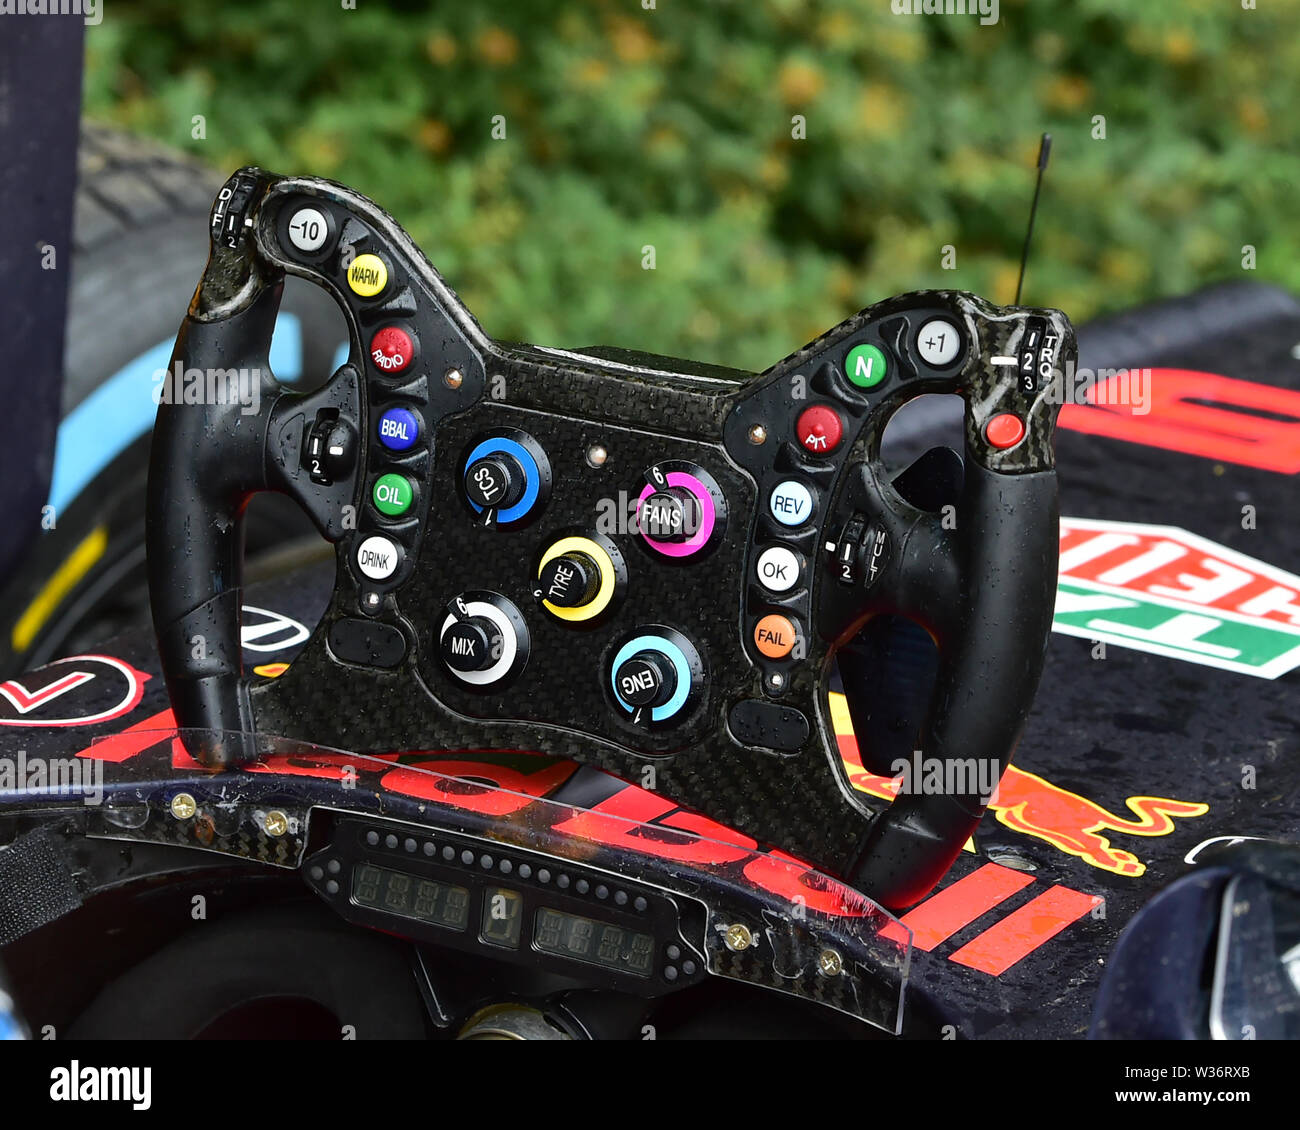 Red Bull F1 steering wheel controls, Goodwood Festival of Speed, 2019,  Festival of Speed, Speed Kings, Motorsport's Record Breakers, July 2019,  Motor Stock Photo - Alamy